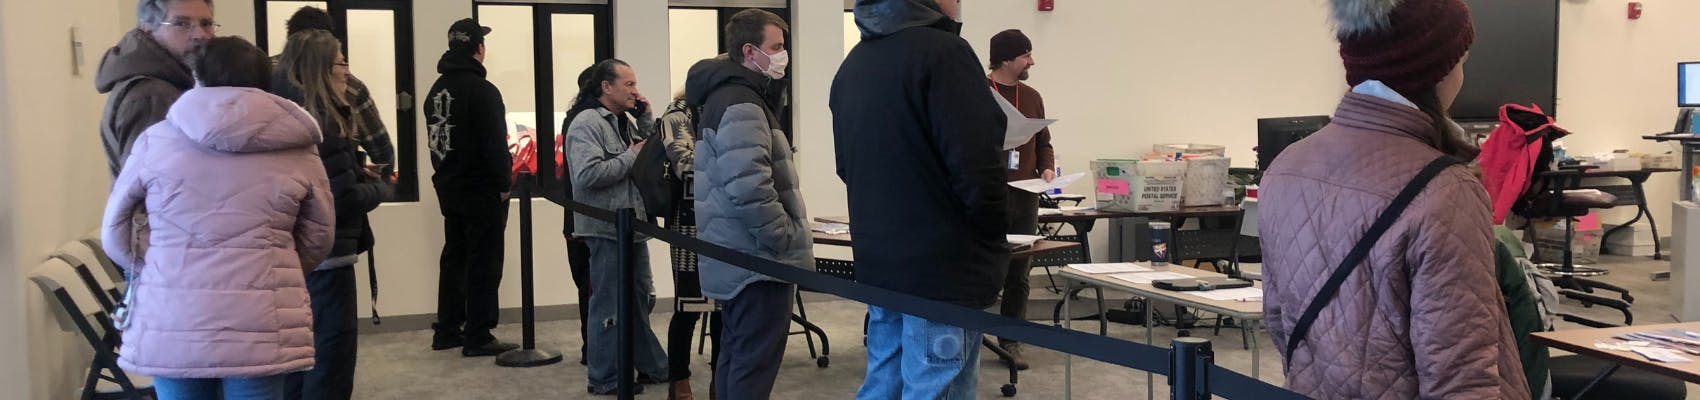 Line of voters at Missoula County Election Center